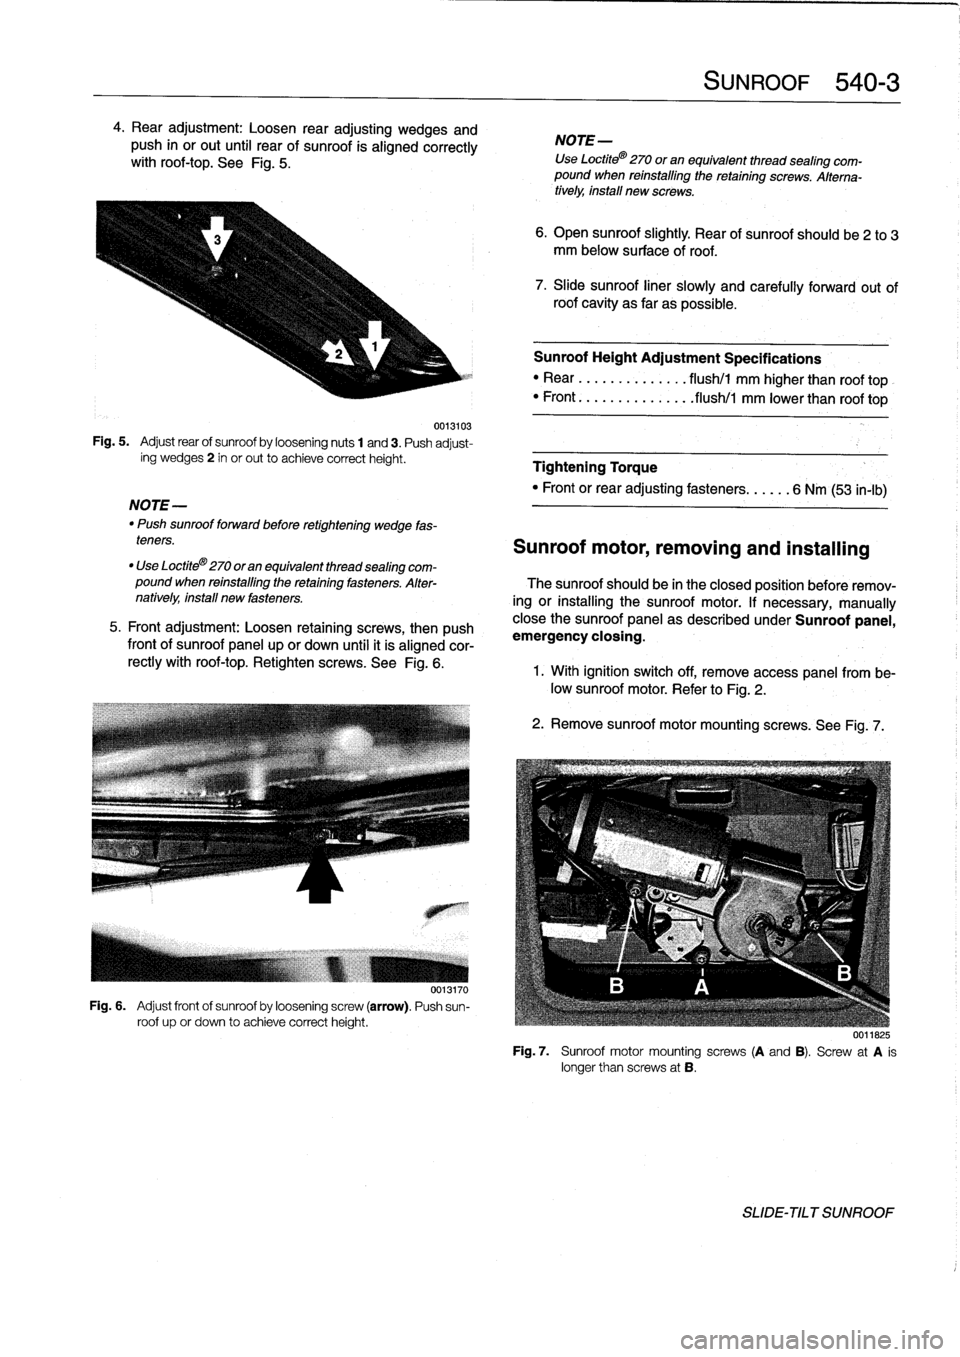 BMW M3 1998 E36 Workshop Manual 4
.
Rear
adjustment
:
Loosen
rear
adjusting
wedges
and
push
in
or
out
until
rear
of
sunroof
is
aligned
correctly
withroof-top
.
See
Fig
.
5
.

0013103
Fig
.
5
.

	

Adjust
rear
of
sunroof
by
loosening